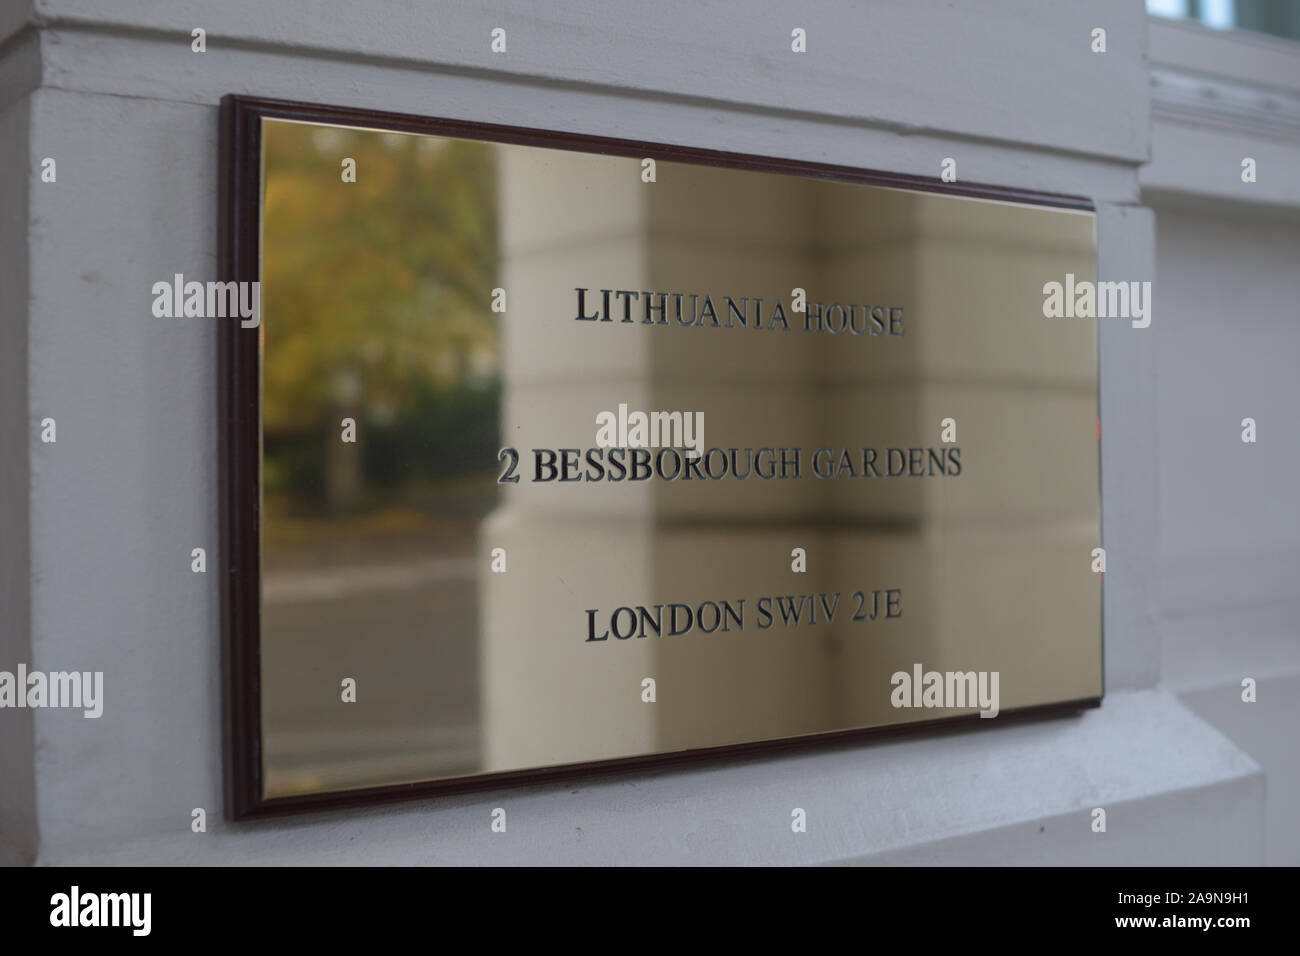 Brass plaque sign of Lithuanian embassy in London Stock Photo